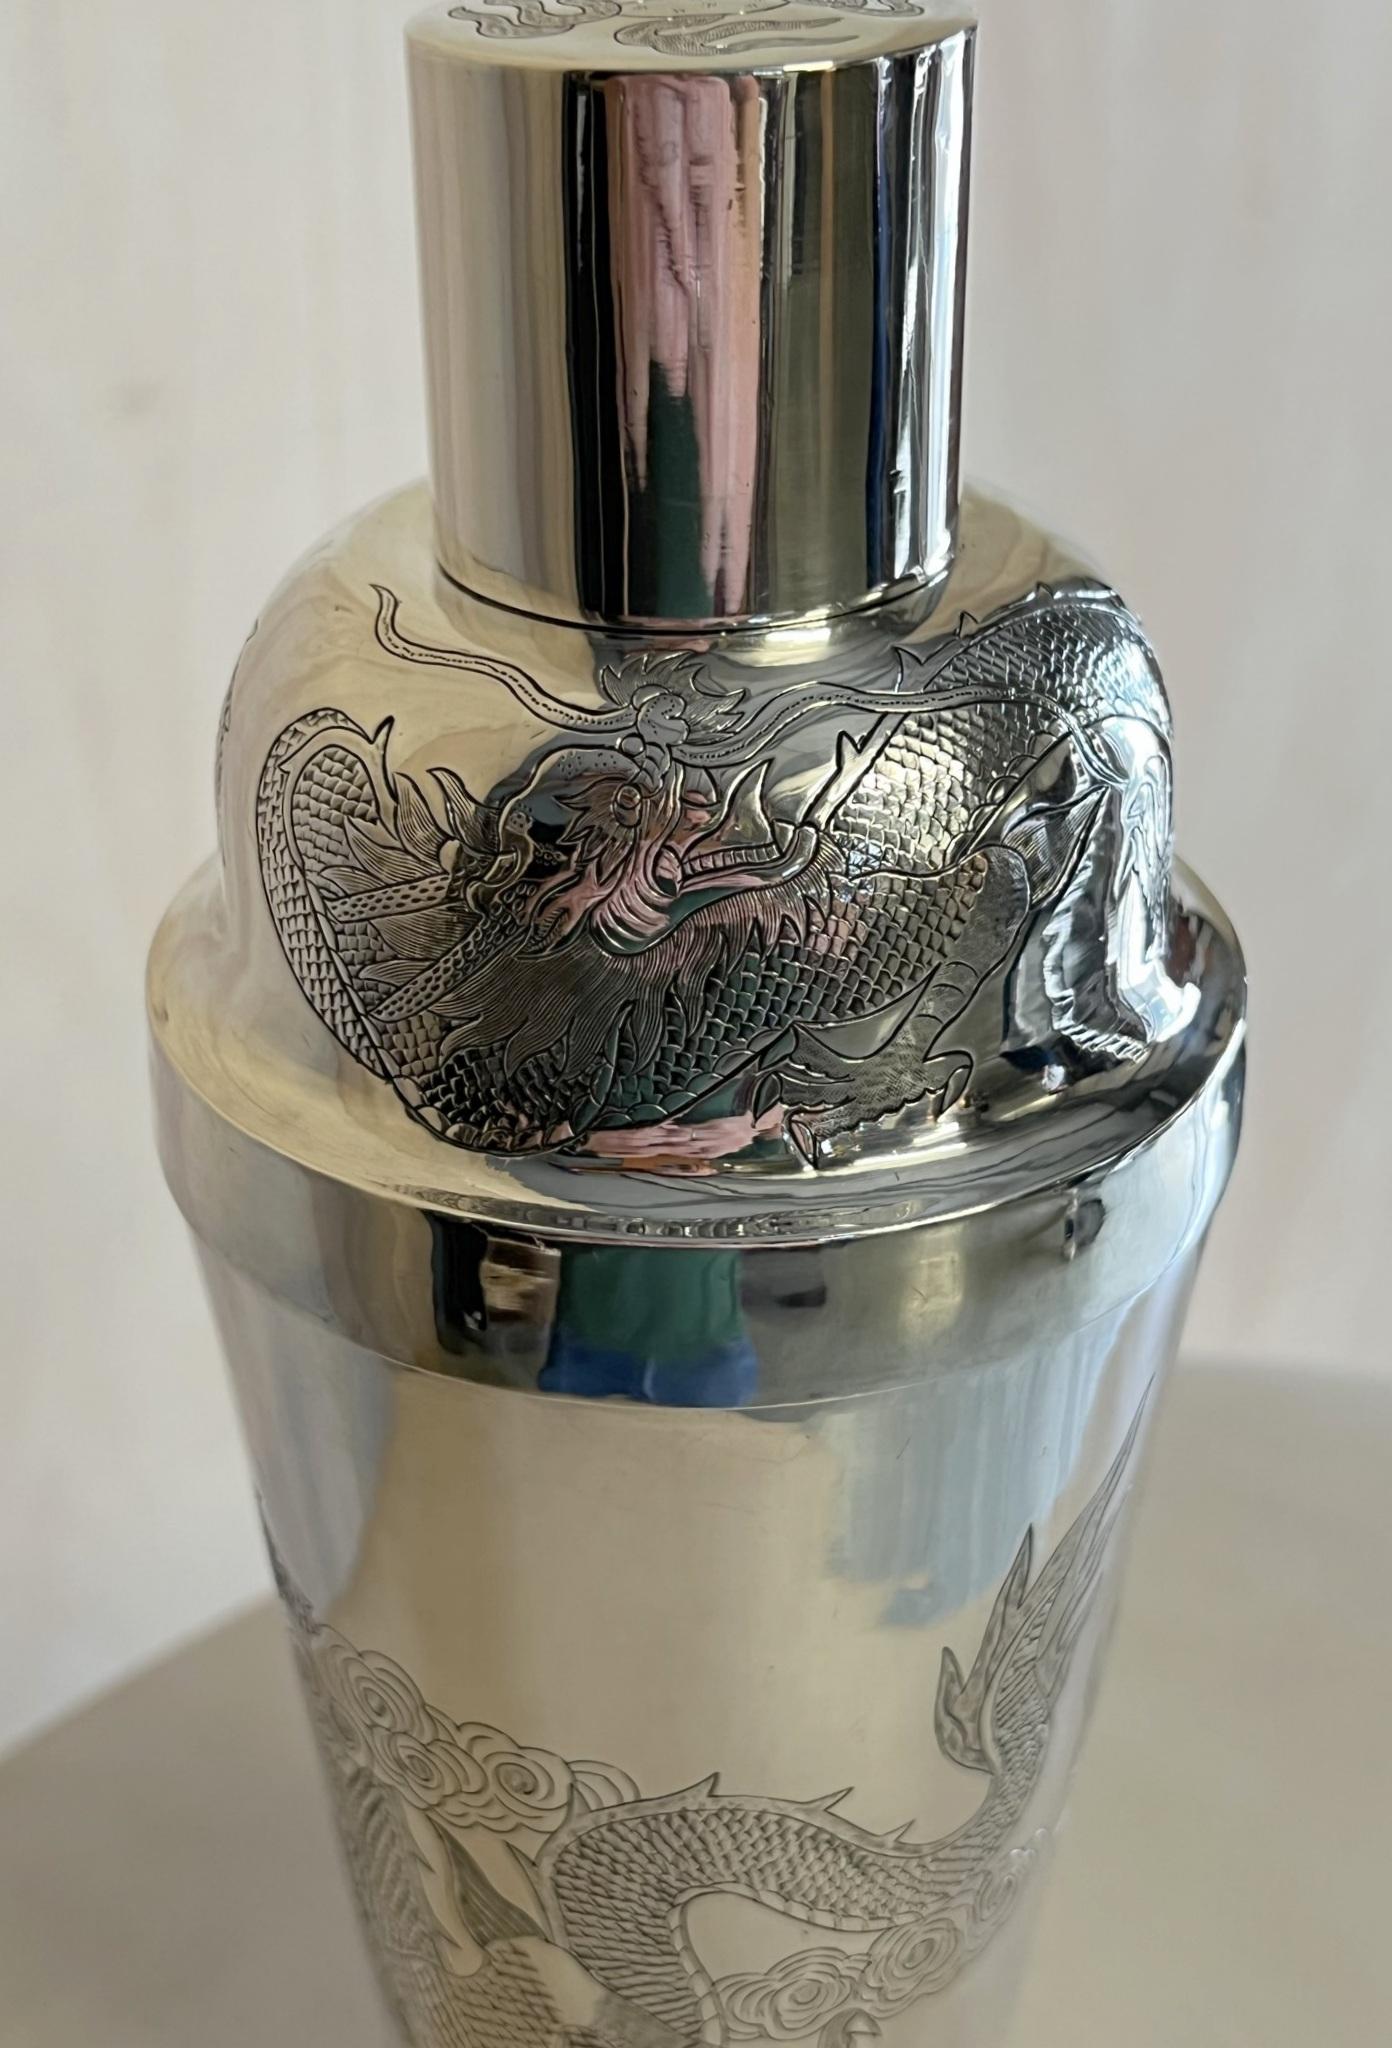 Chinese Export STUNNING ANTIQUE CIRA 1900 STERLING SILVER CHiNESE EXPORT DRAGON COCKTAIL SHAKER For Sale